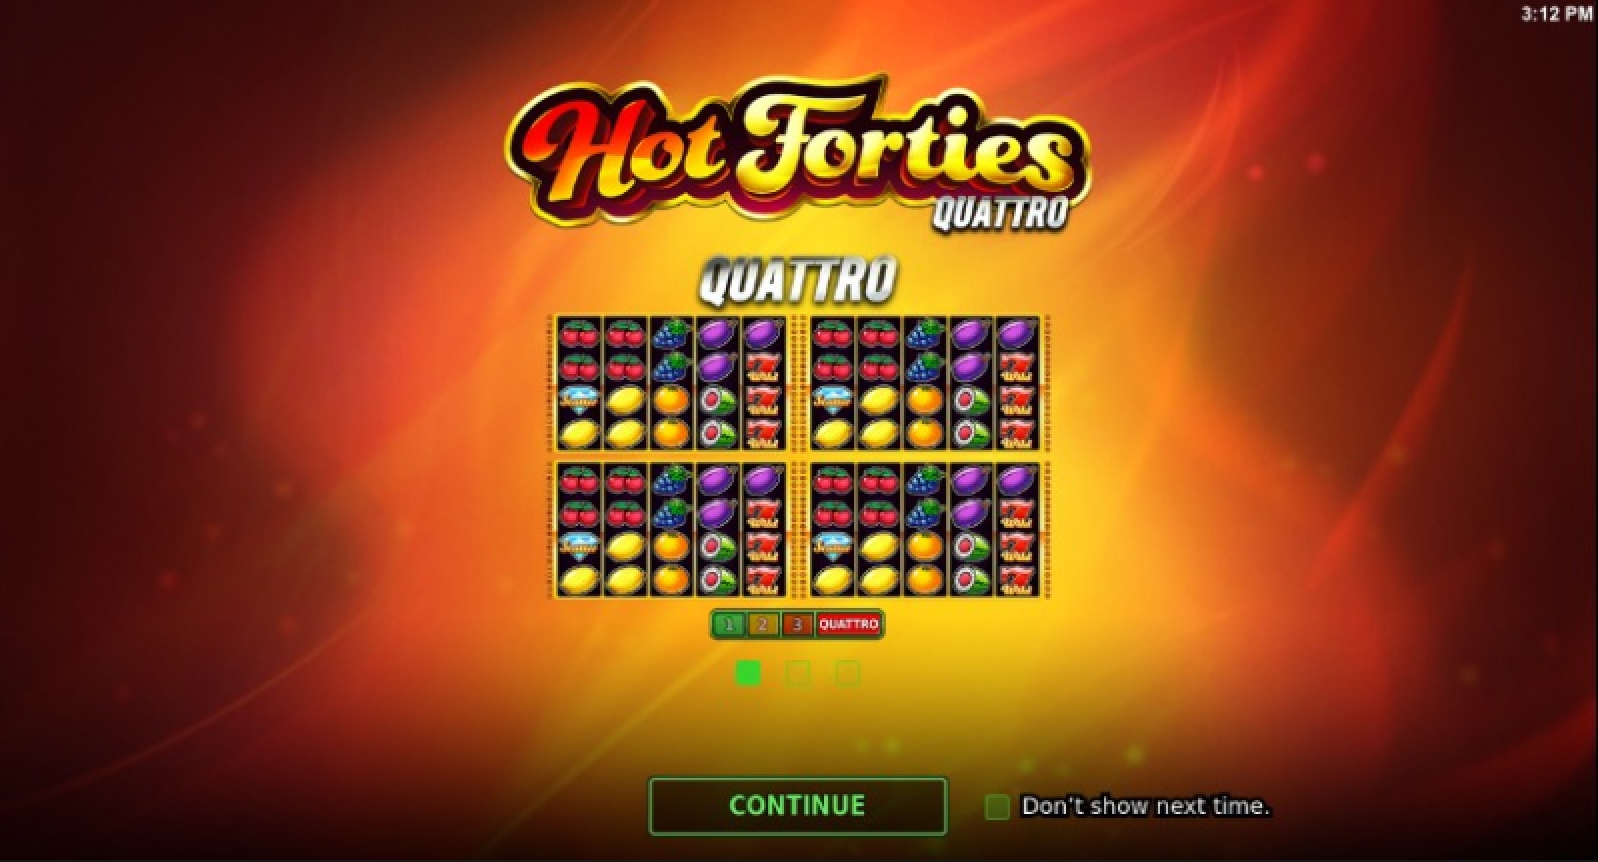 The Hot Forties Quattro Online Slot Demo Game by Stakelogic